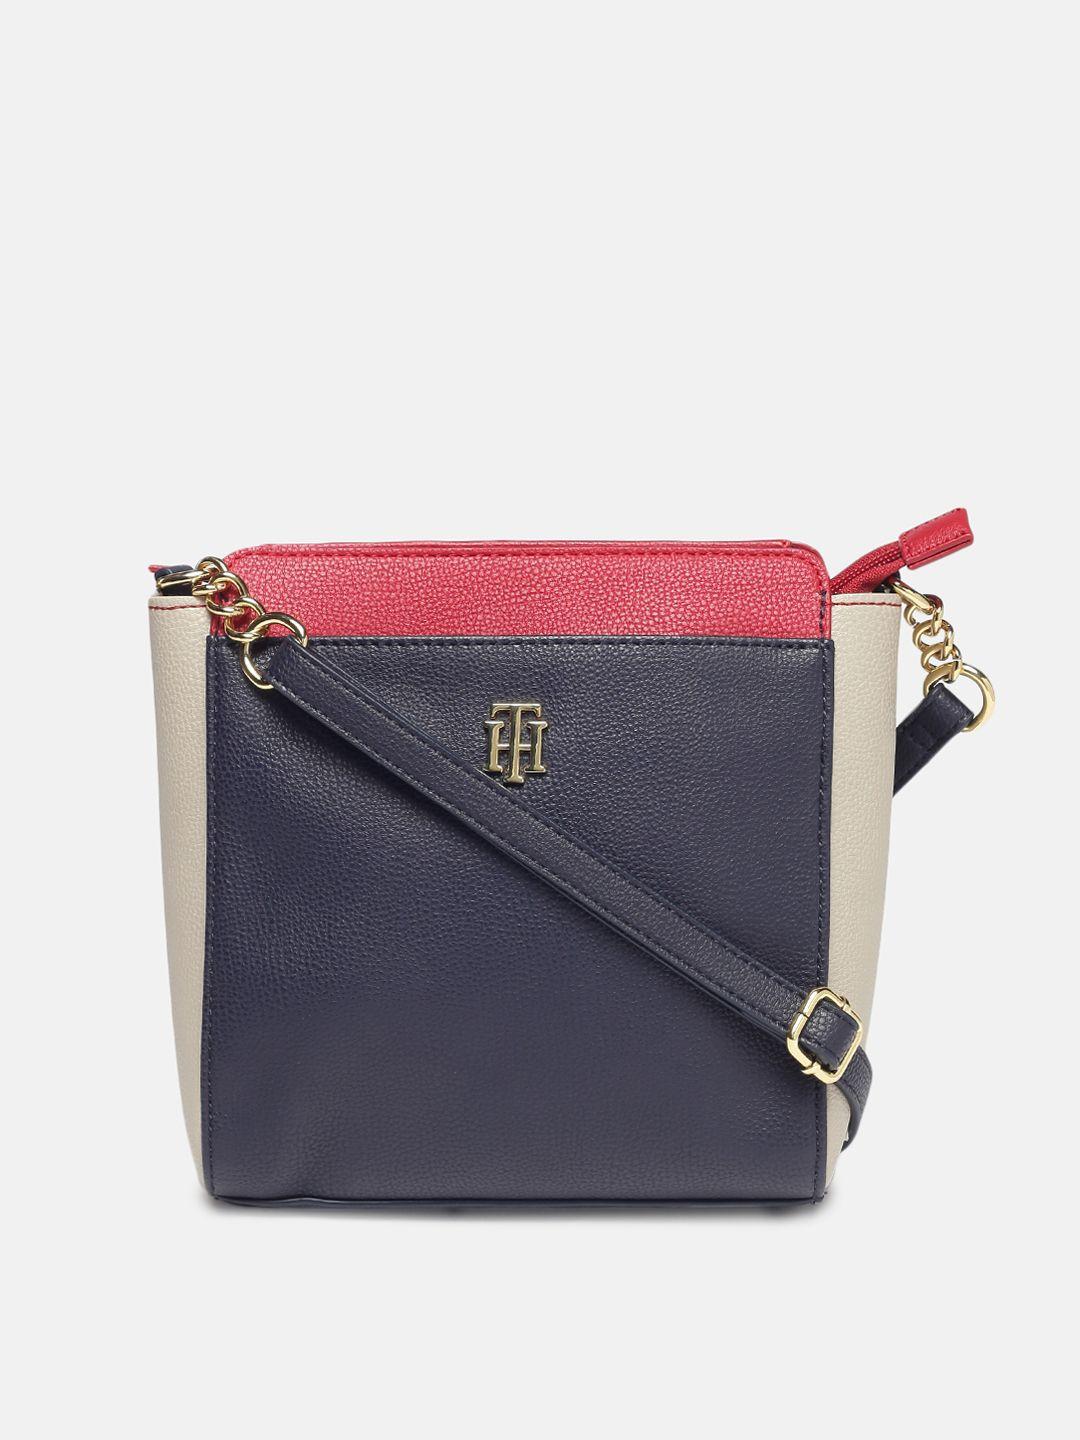 tommy hilfiger navy blue and red colourblocked structured sling bag